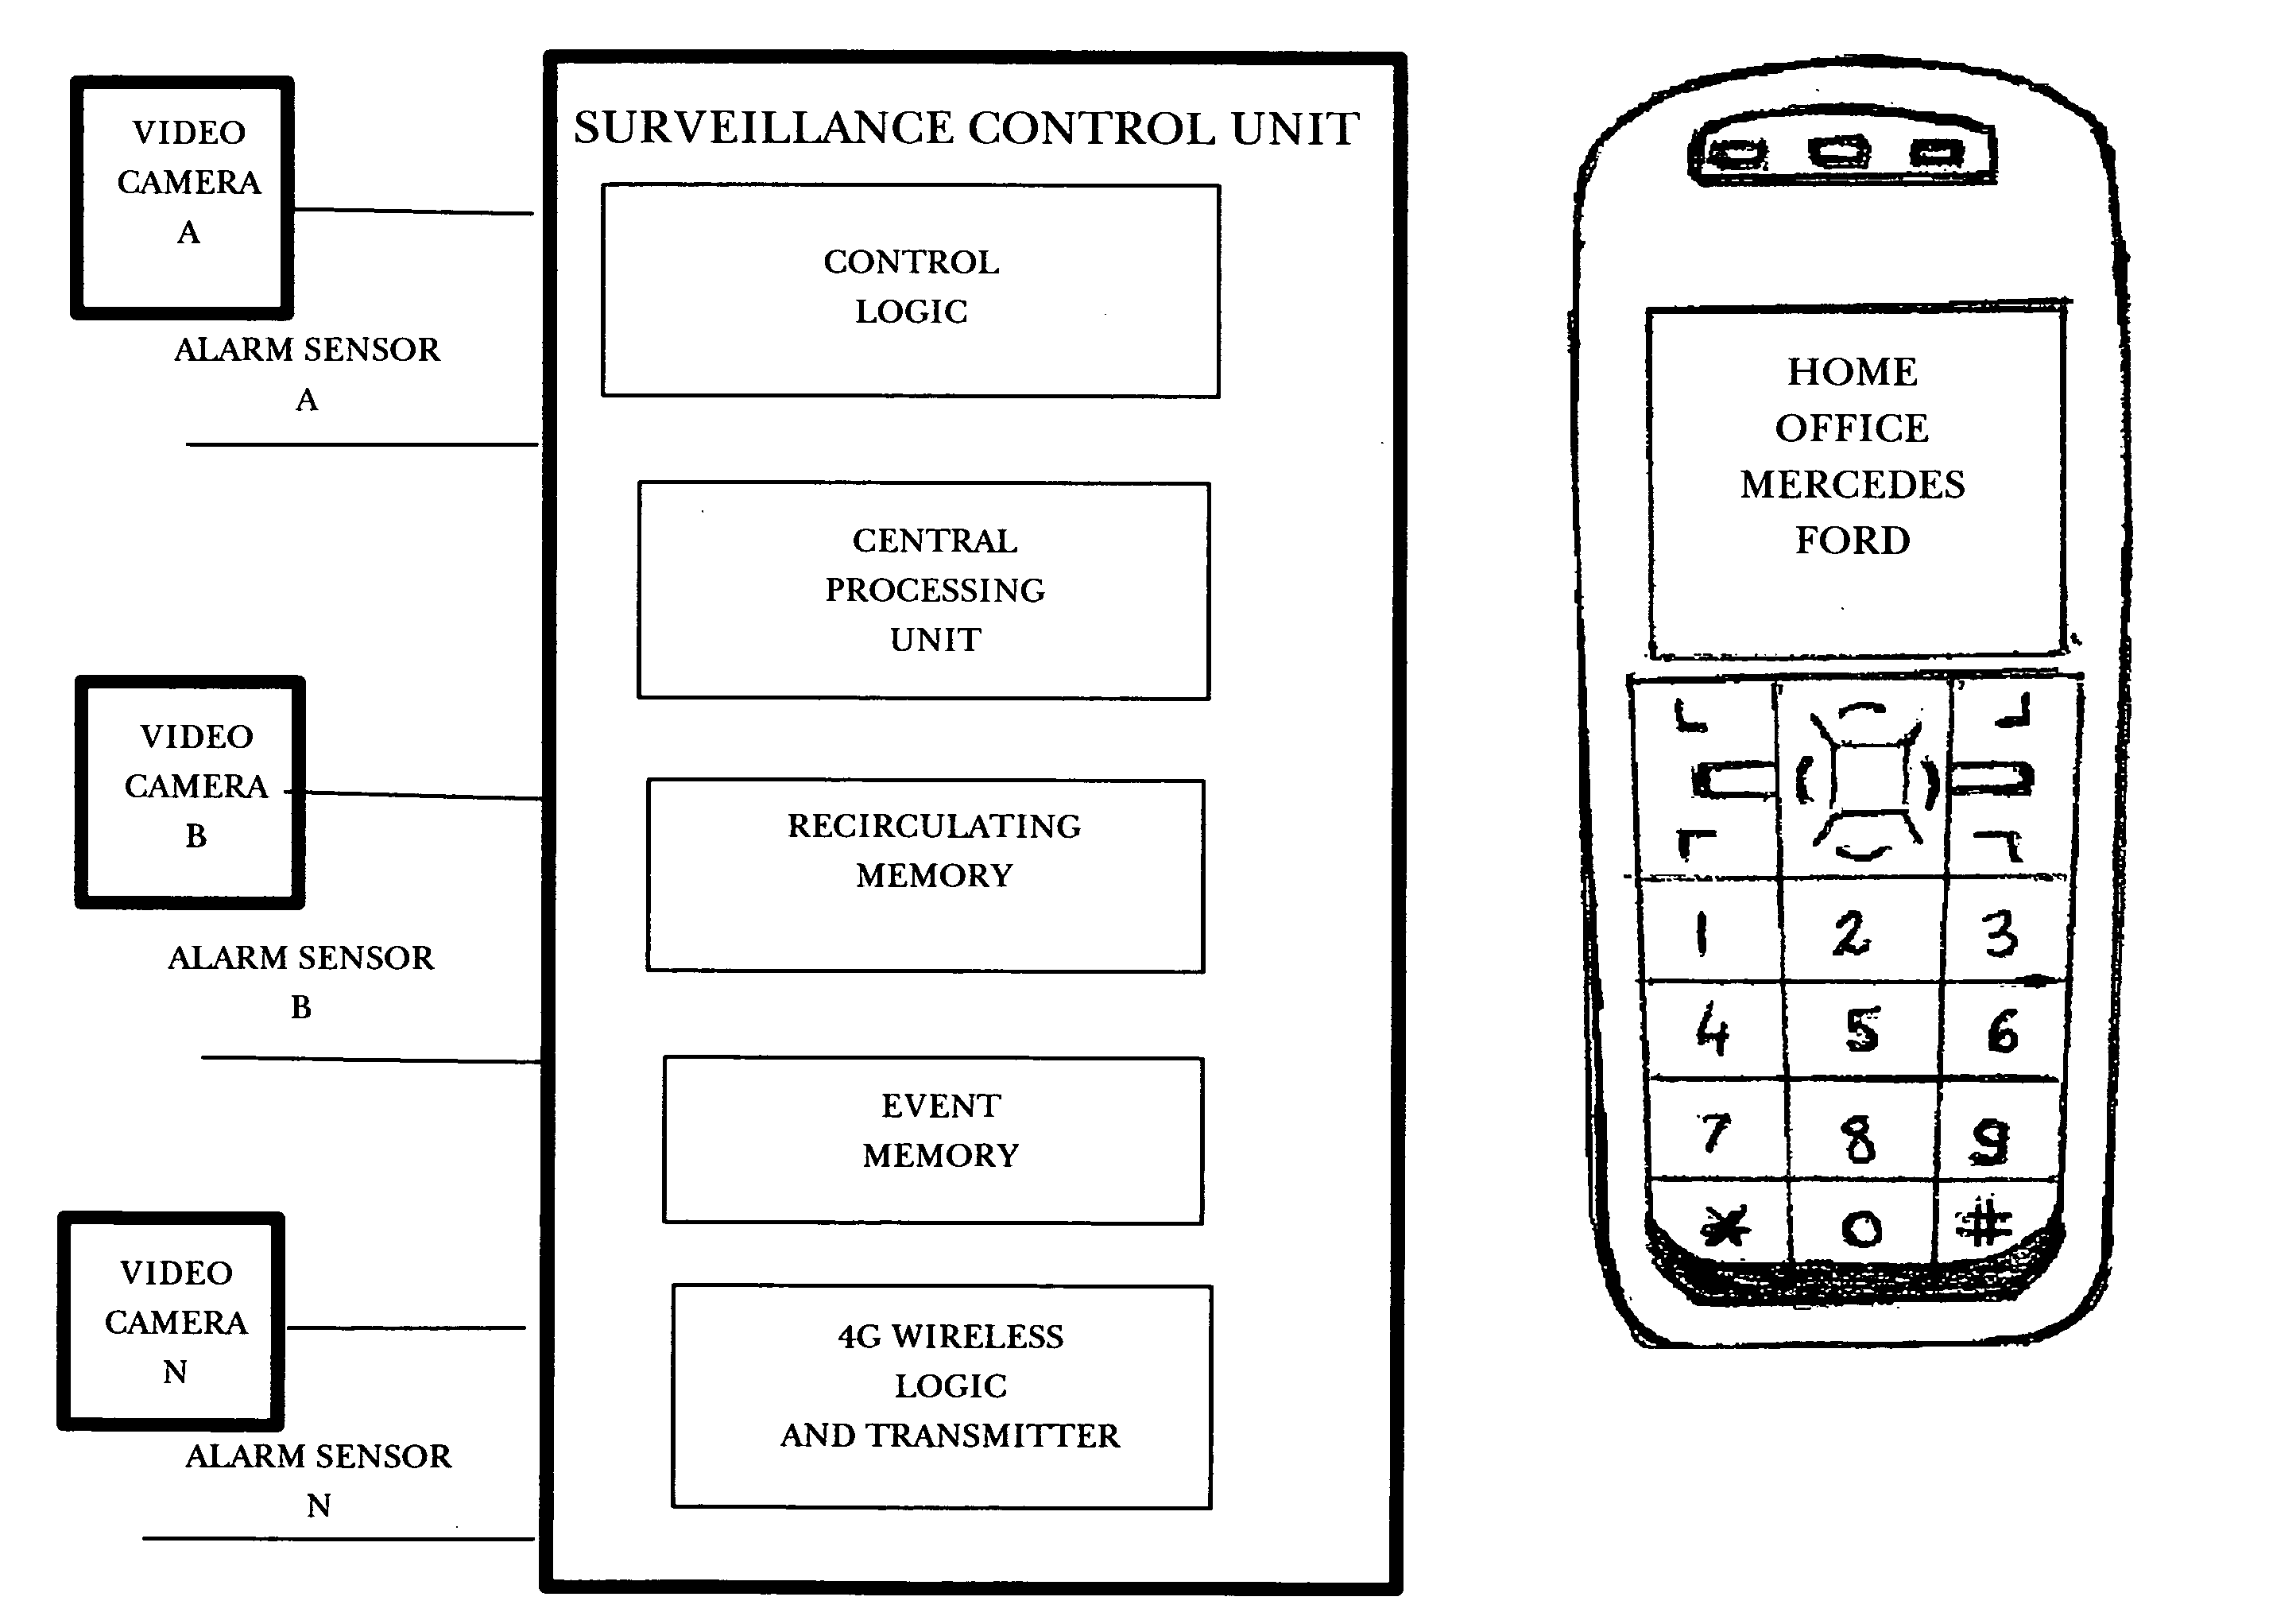 Surveillance device by use of digital cameras linked to a cellular or wireless telephone